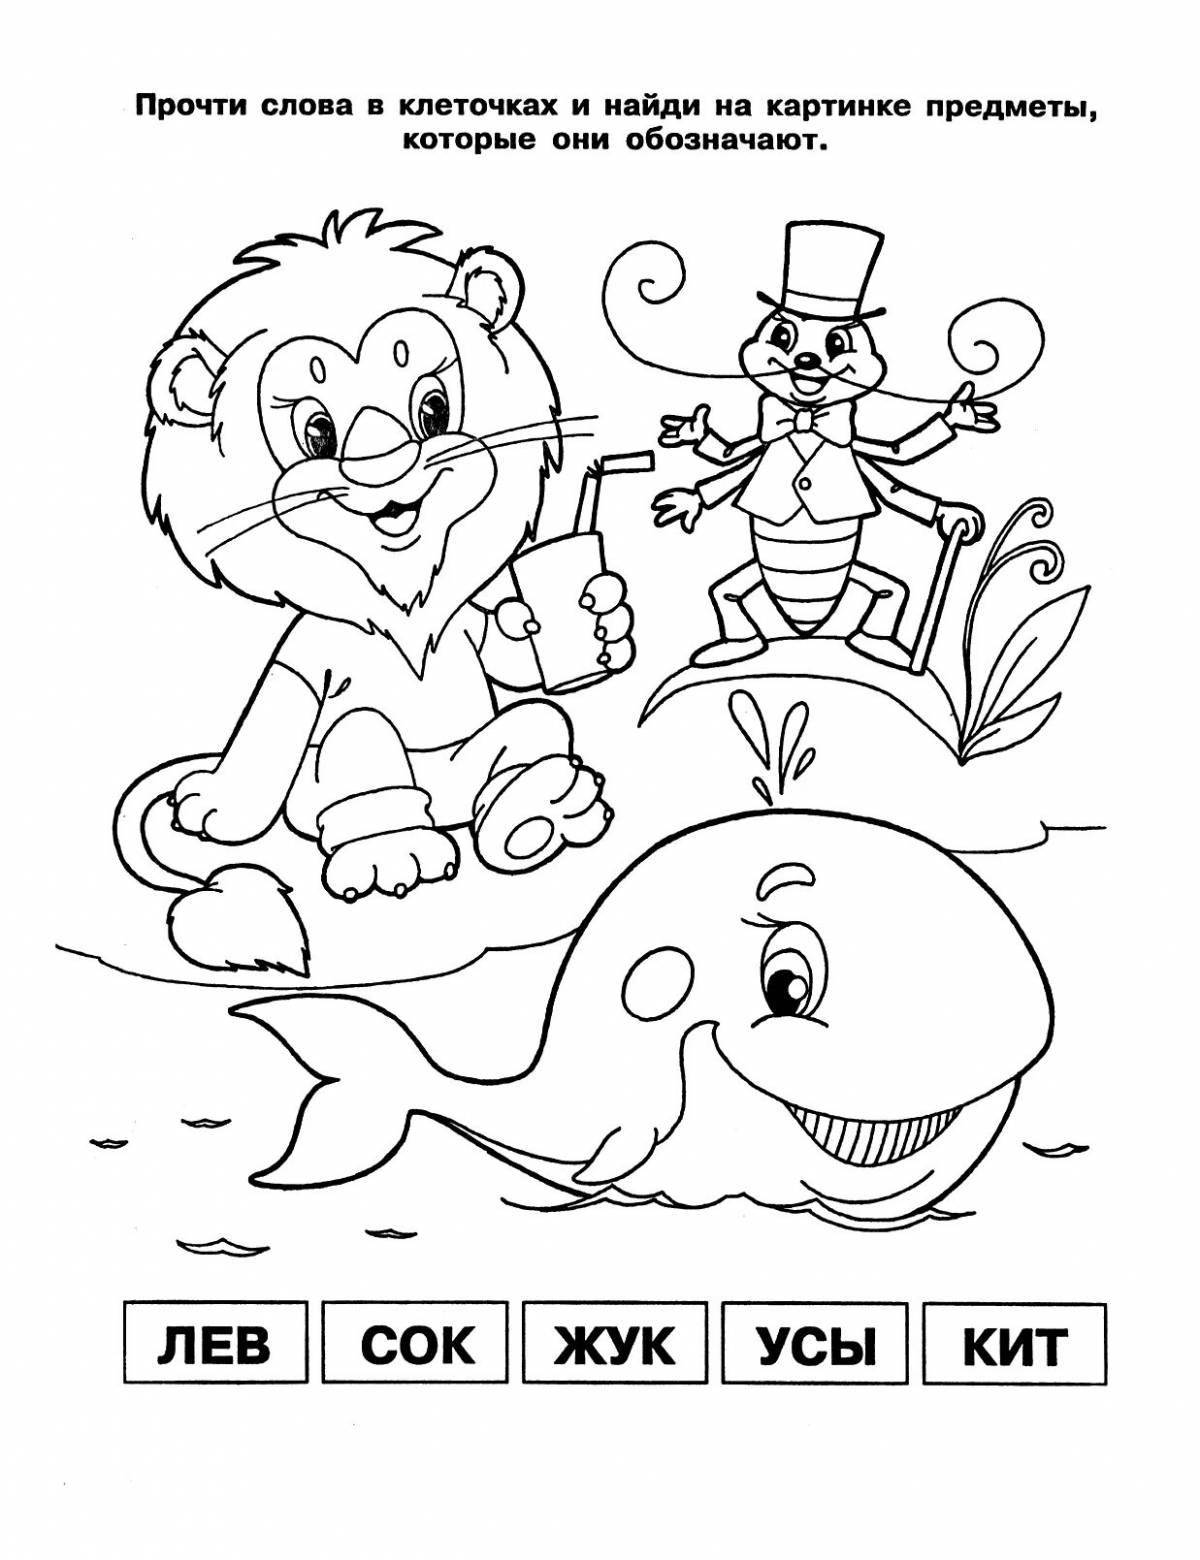 Creative syllable coloring pages for preschoolers 6-7 years old